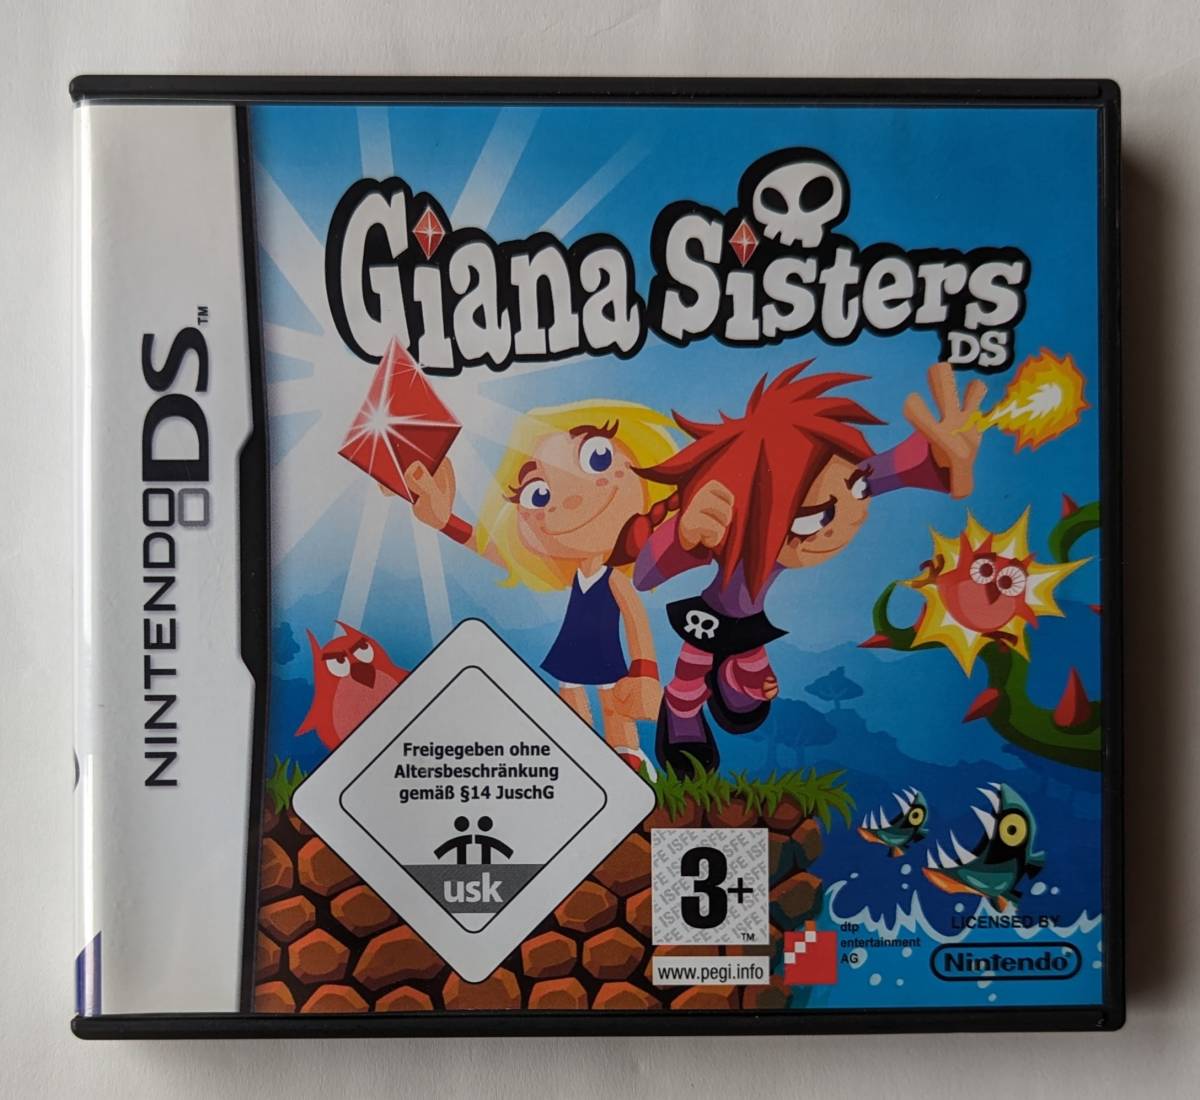 DS グレートギアナシスターズ GIANA SISTERS EU版 ★ ニンテンドーDS / 2DS / 3DS